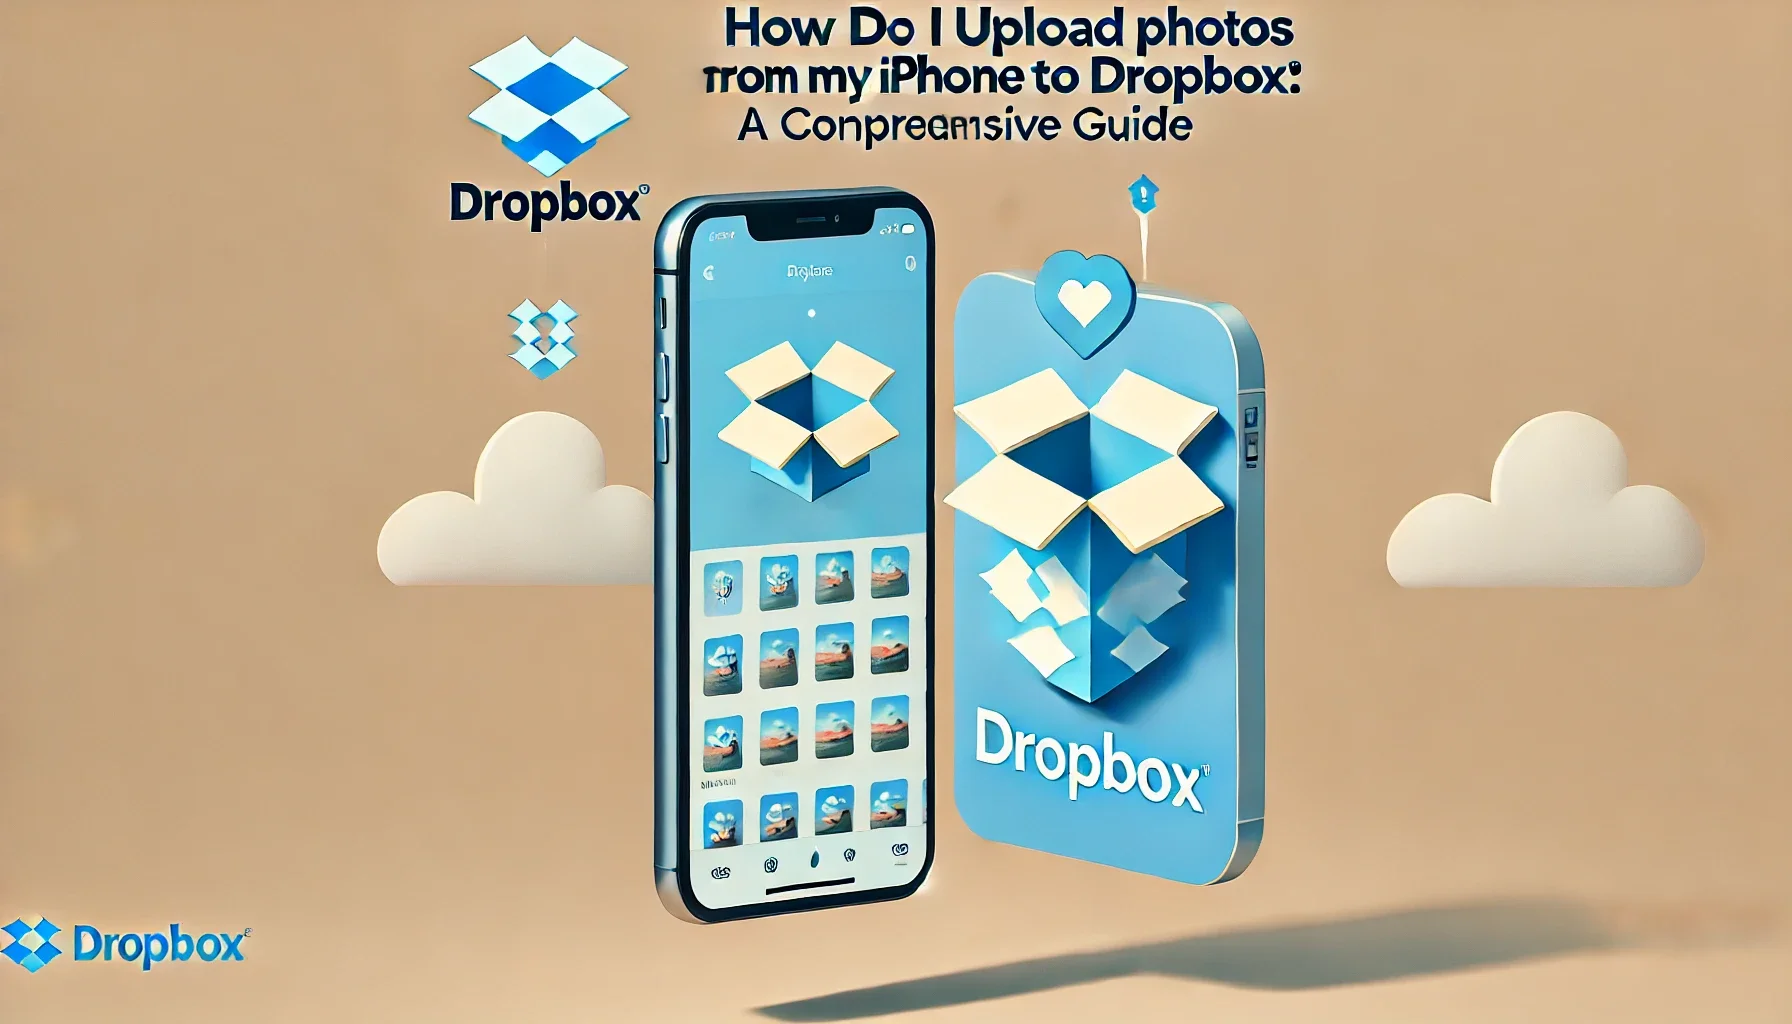 Upload Photos from My iPhone to Dropbox: A Comprehensive Guide